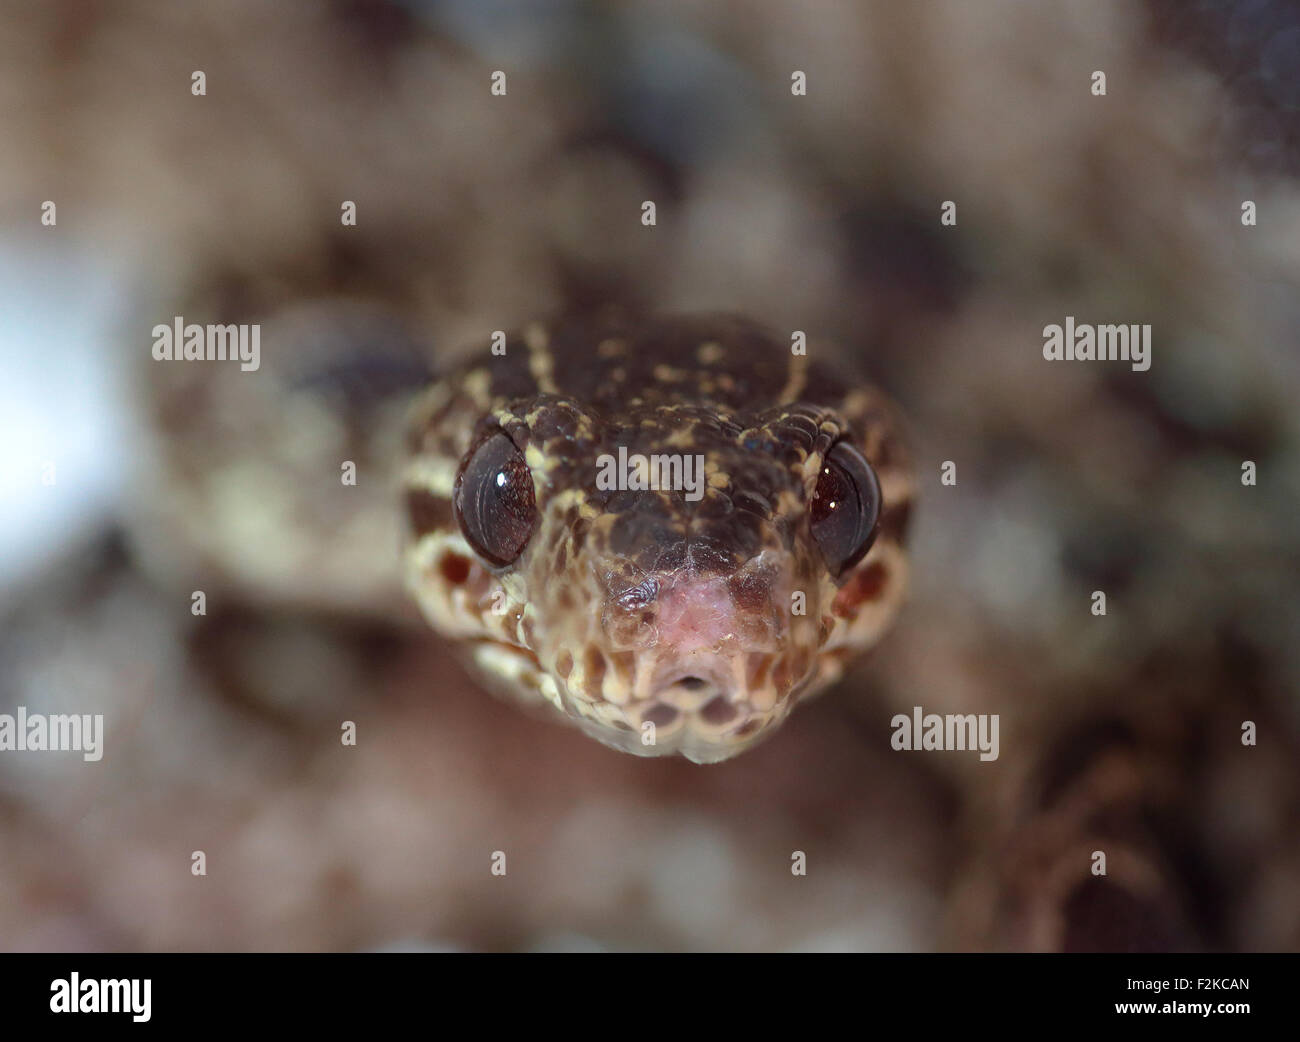 Closeup frontal view of a snake pointing at camera with low depth of field Stock Photo